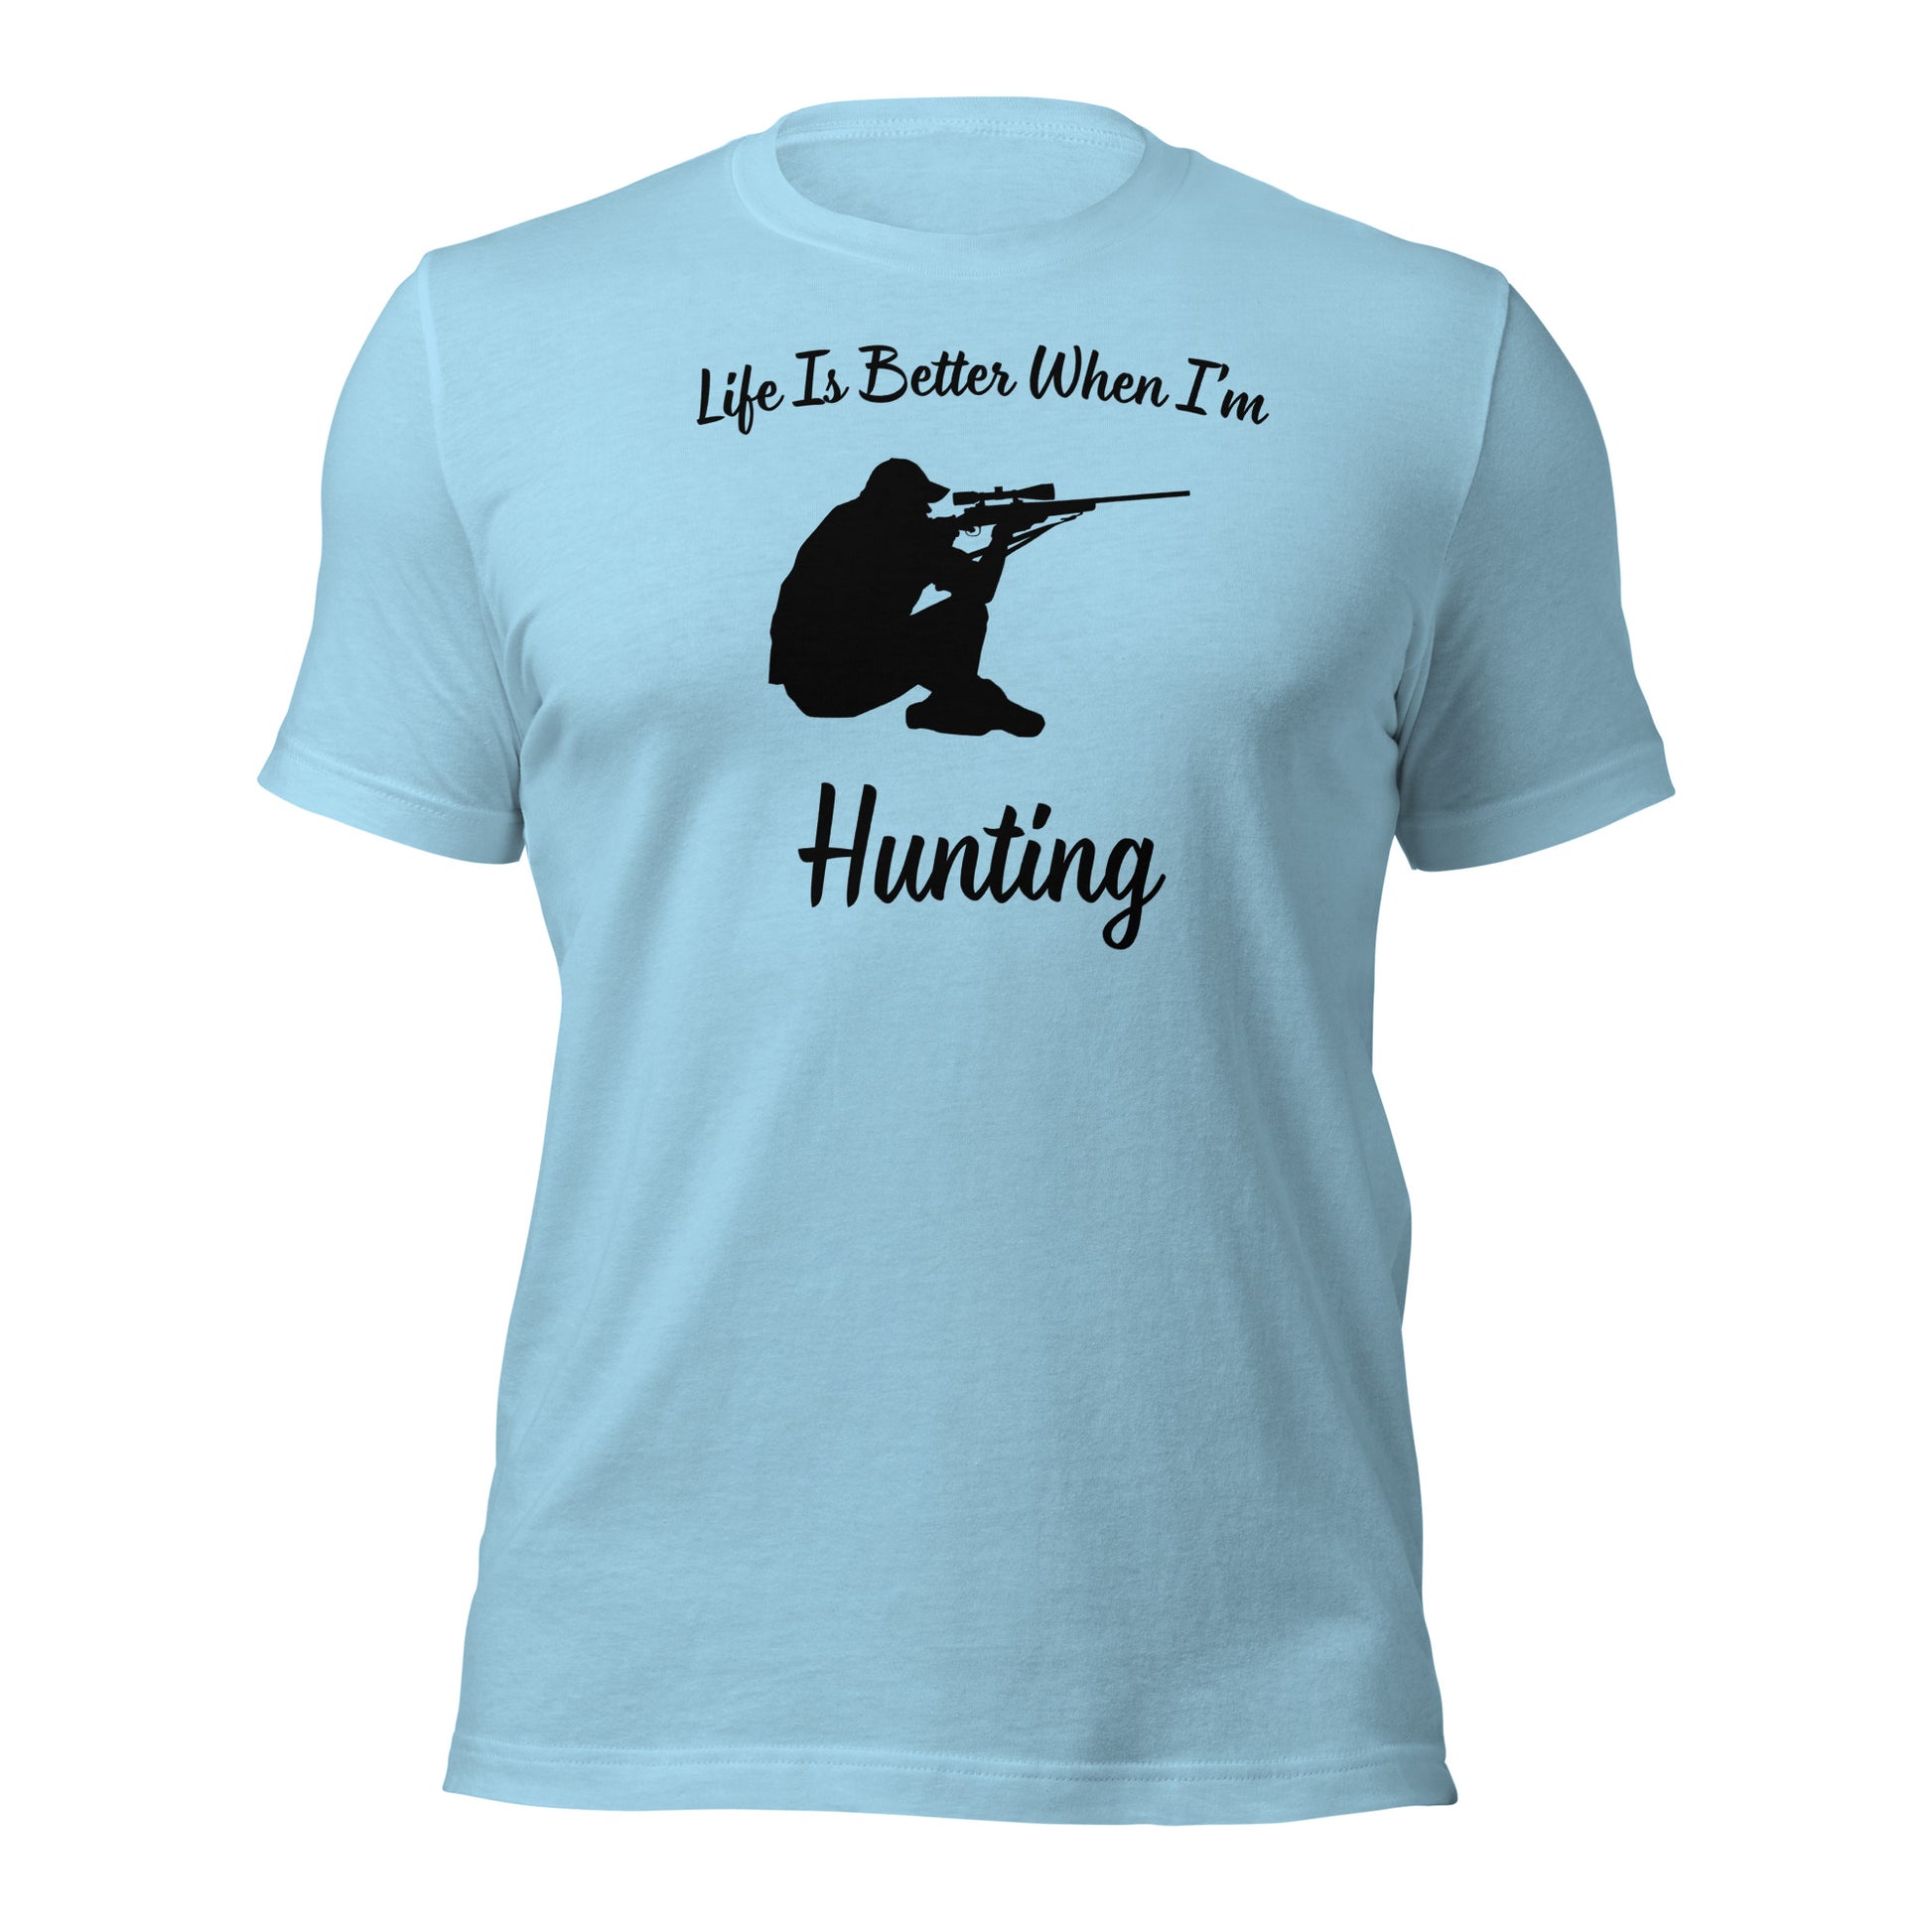 "Life Is Better When I'm Hunting" T-Shirt - Weave Got Gifts - Unique Gifts You Won’t Find Anywhere Else!